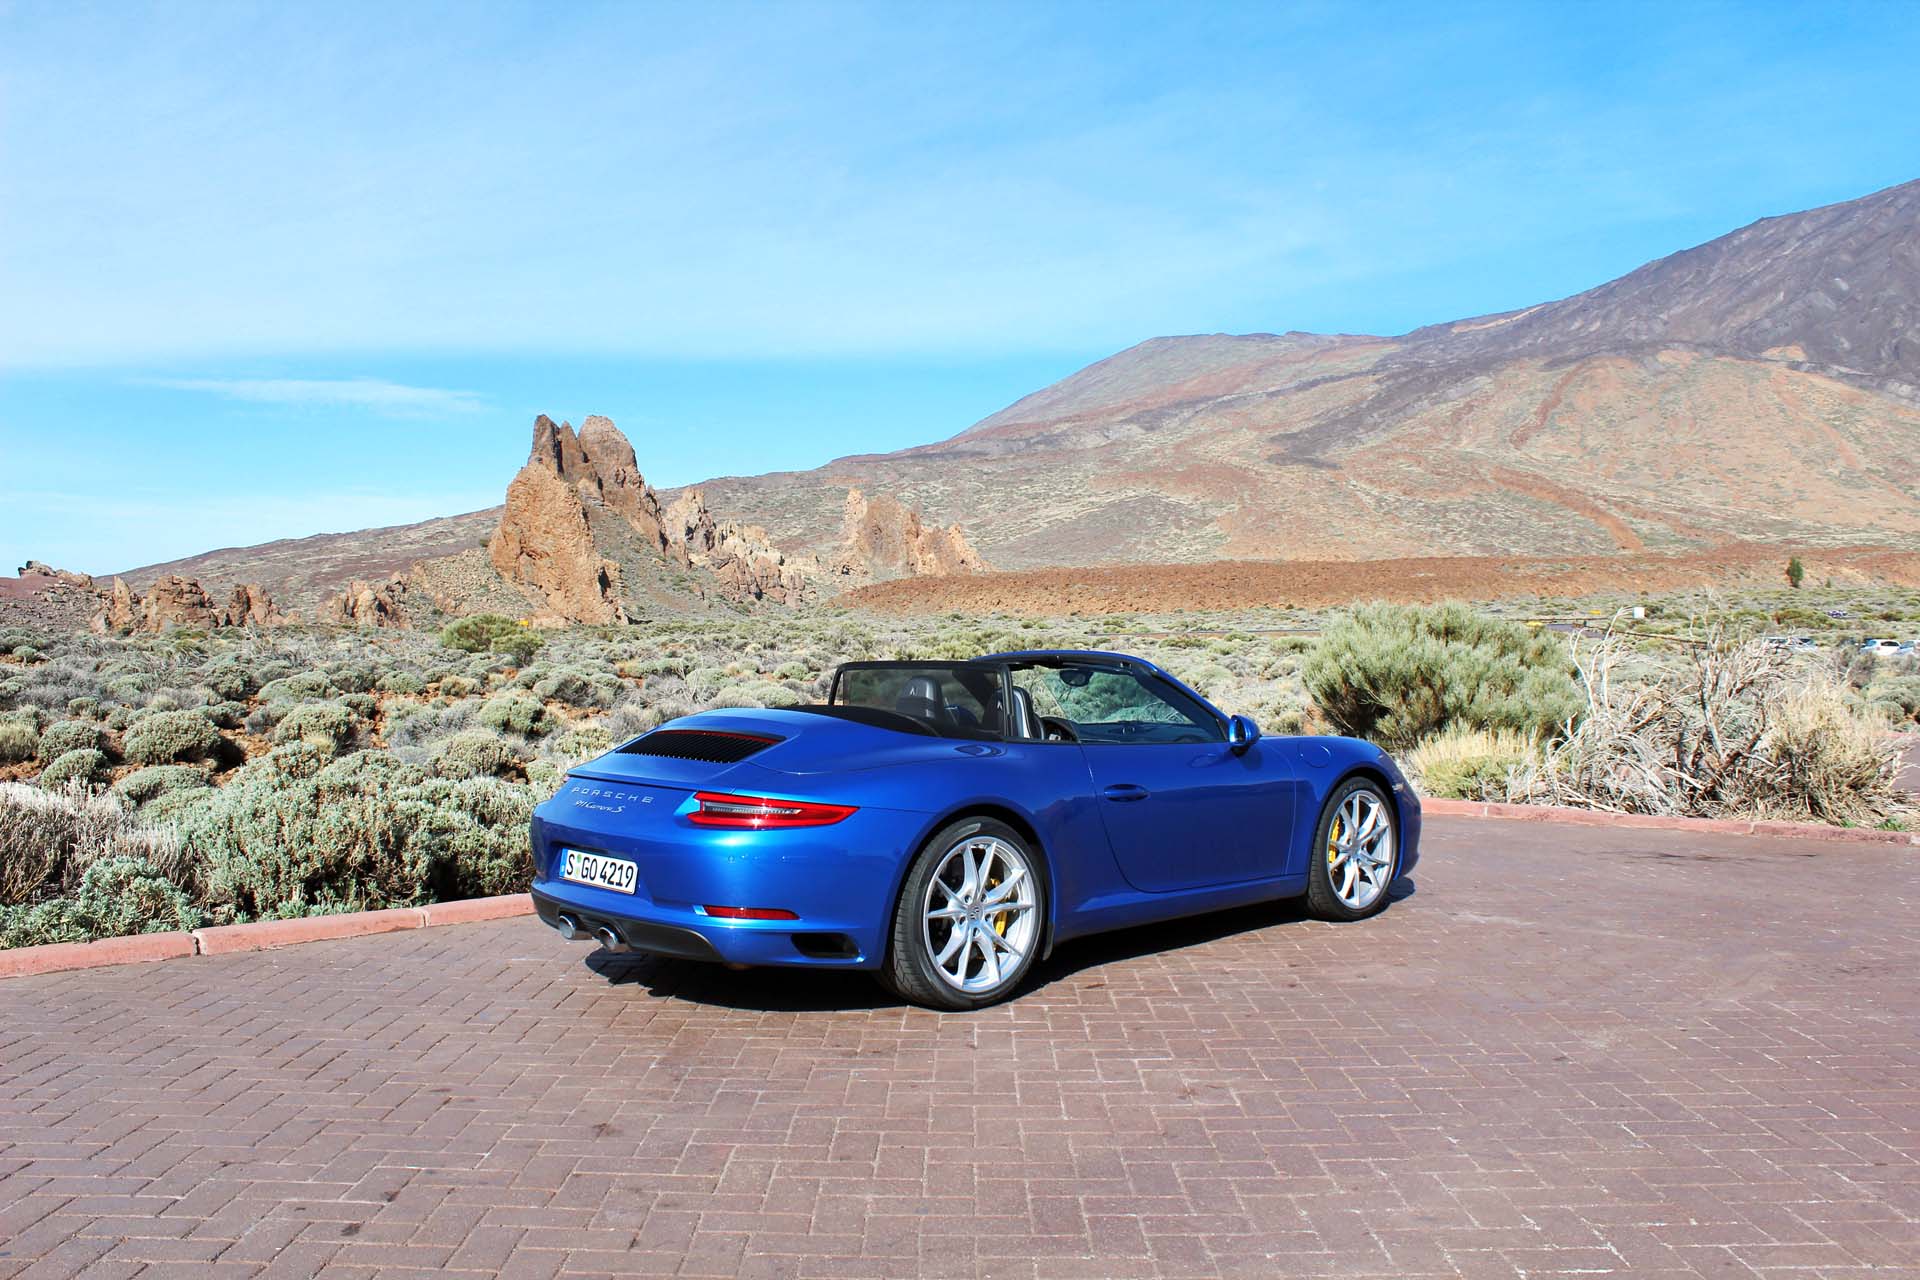 The 2017 Porsche 911 Carrera Cabriolet starts at $116,200. This is a Carrera S Cabriolet – base price $132,200. That volcano last erupted in 1798. If it happens again, the 911’s roof goes up in less than 20 seconds.